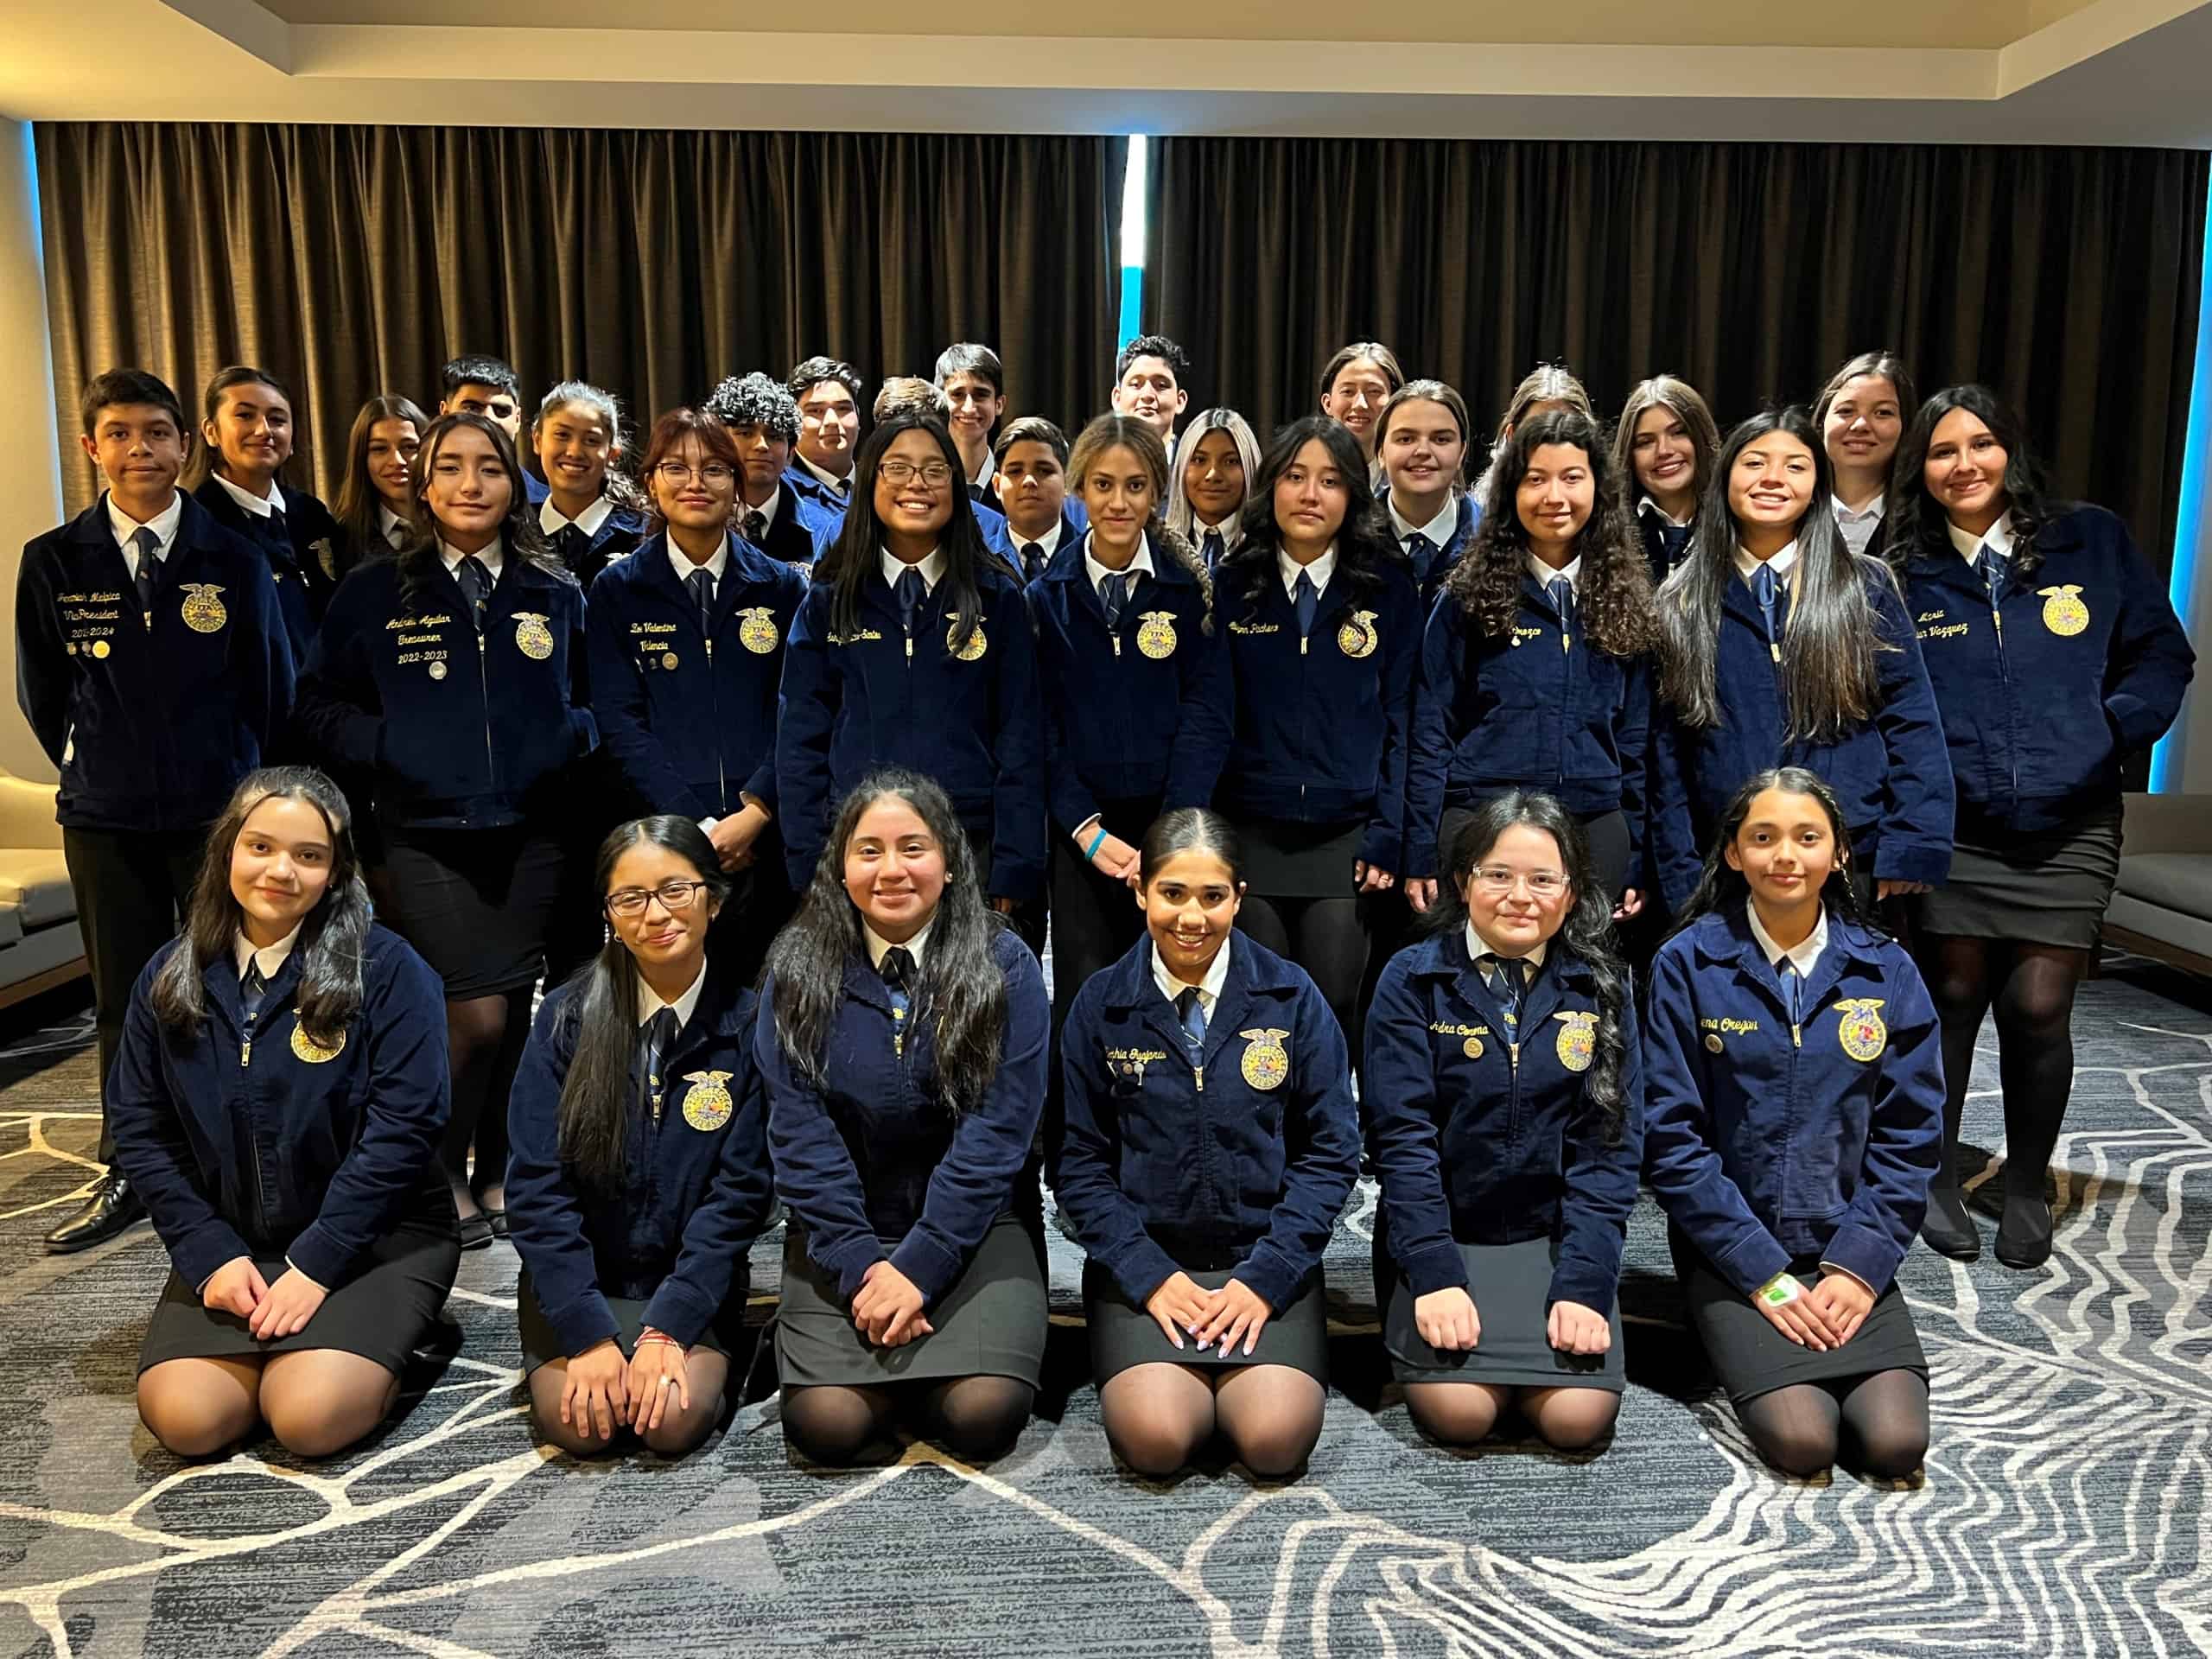 Taking the Stage: The First National Spanish FFA Creed